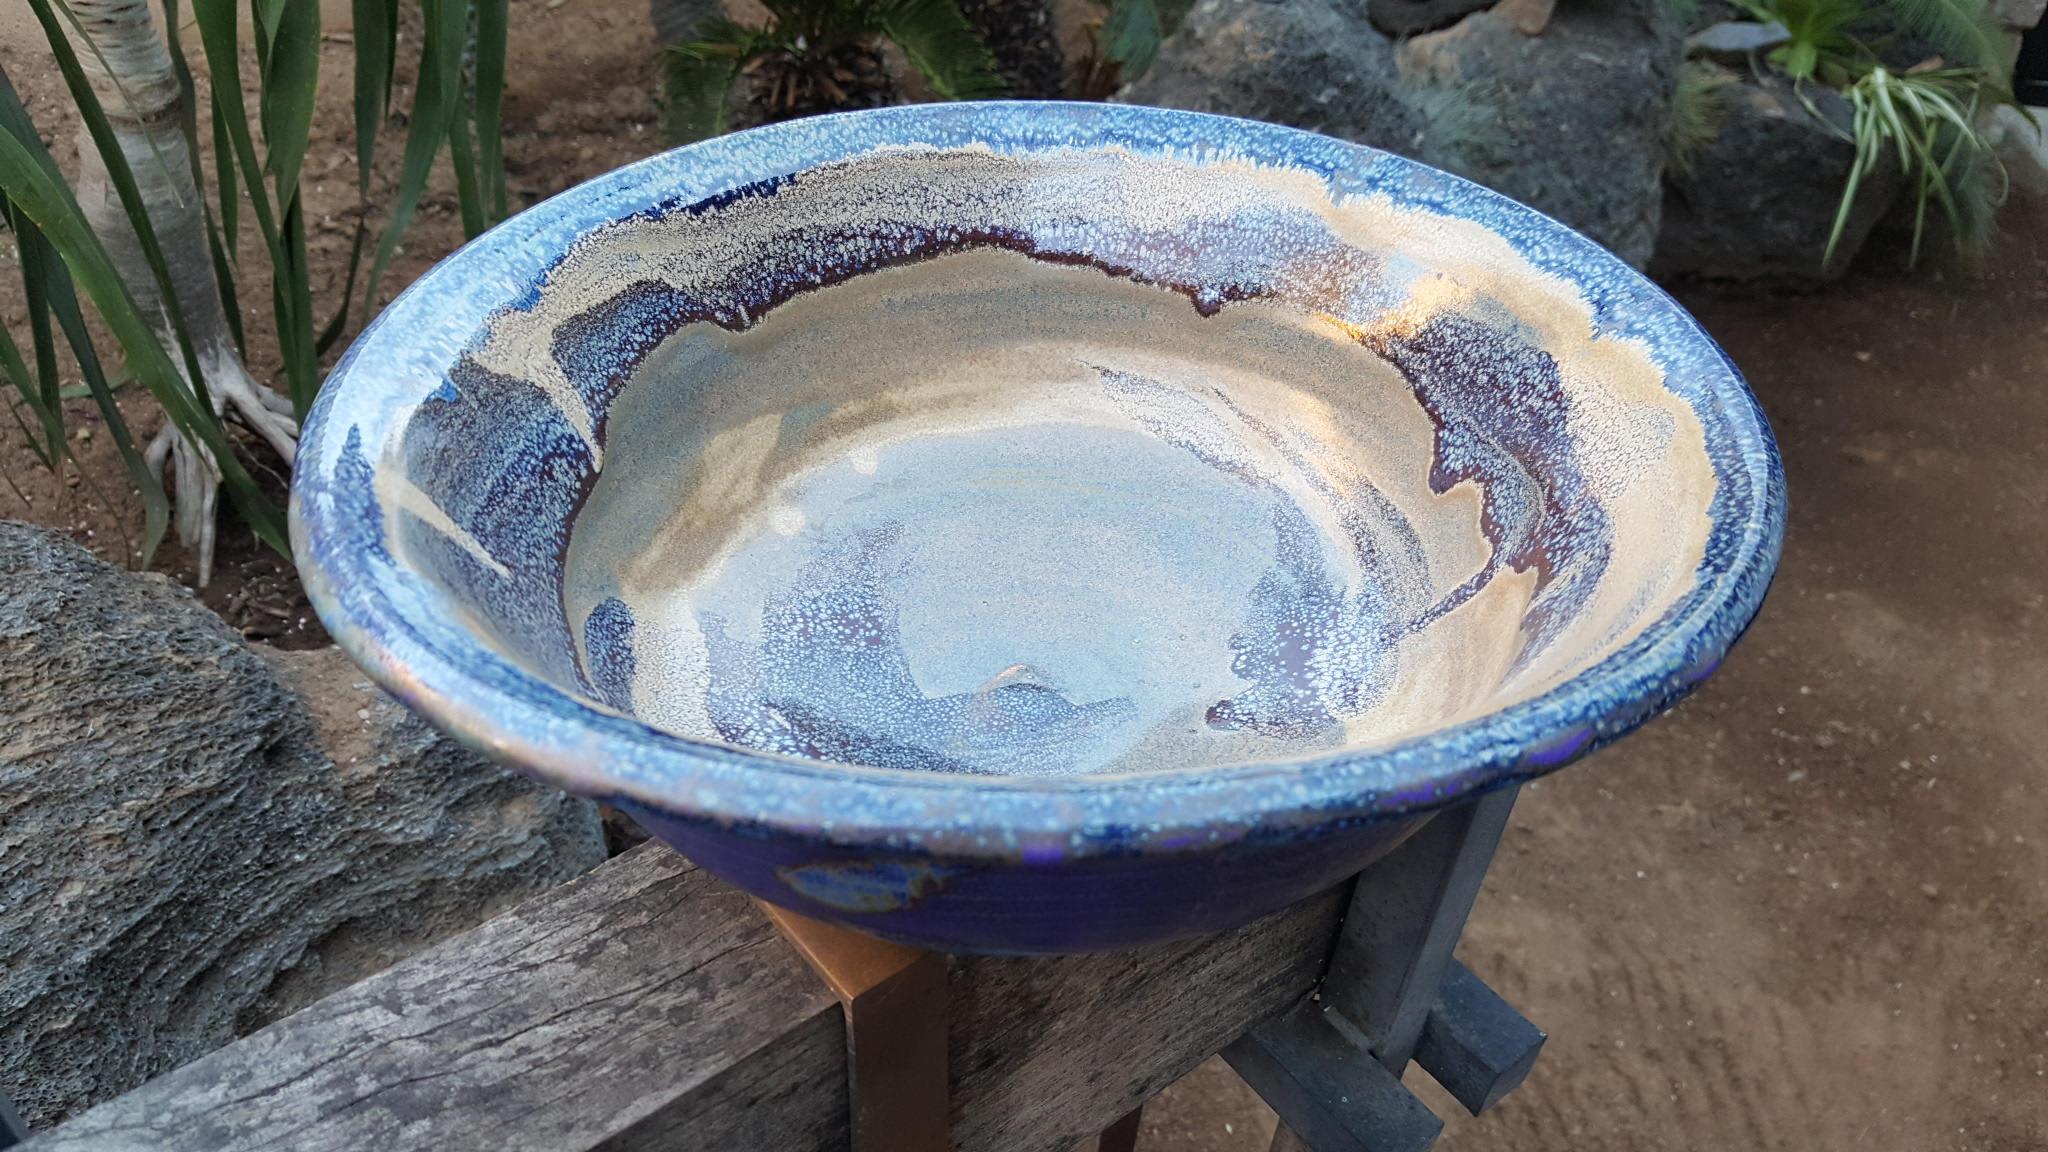 Ray Harris California Artist Ceramic Bowl. 
1990s Ray Harris Ceramic Large Decorative Bowl Signed And Dated.

Ray Harris California Artist Large Vintage Ceramic Fruit Bowl, Hand Thrown Ceramic Bowl Signed And Dated.
Beautiful Hues Of Blue Glazes